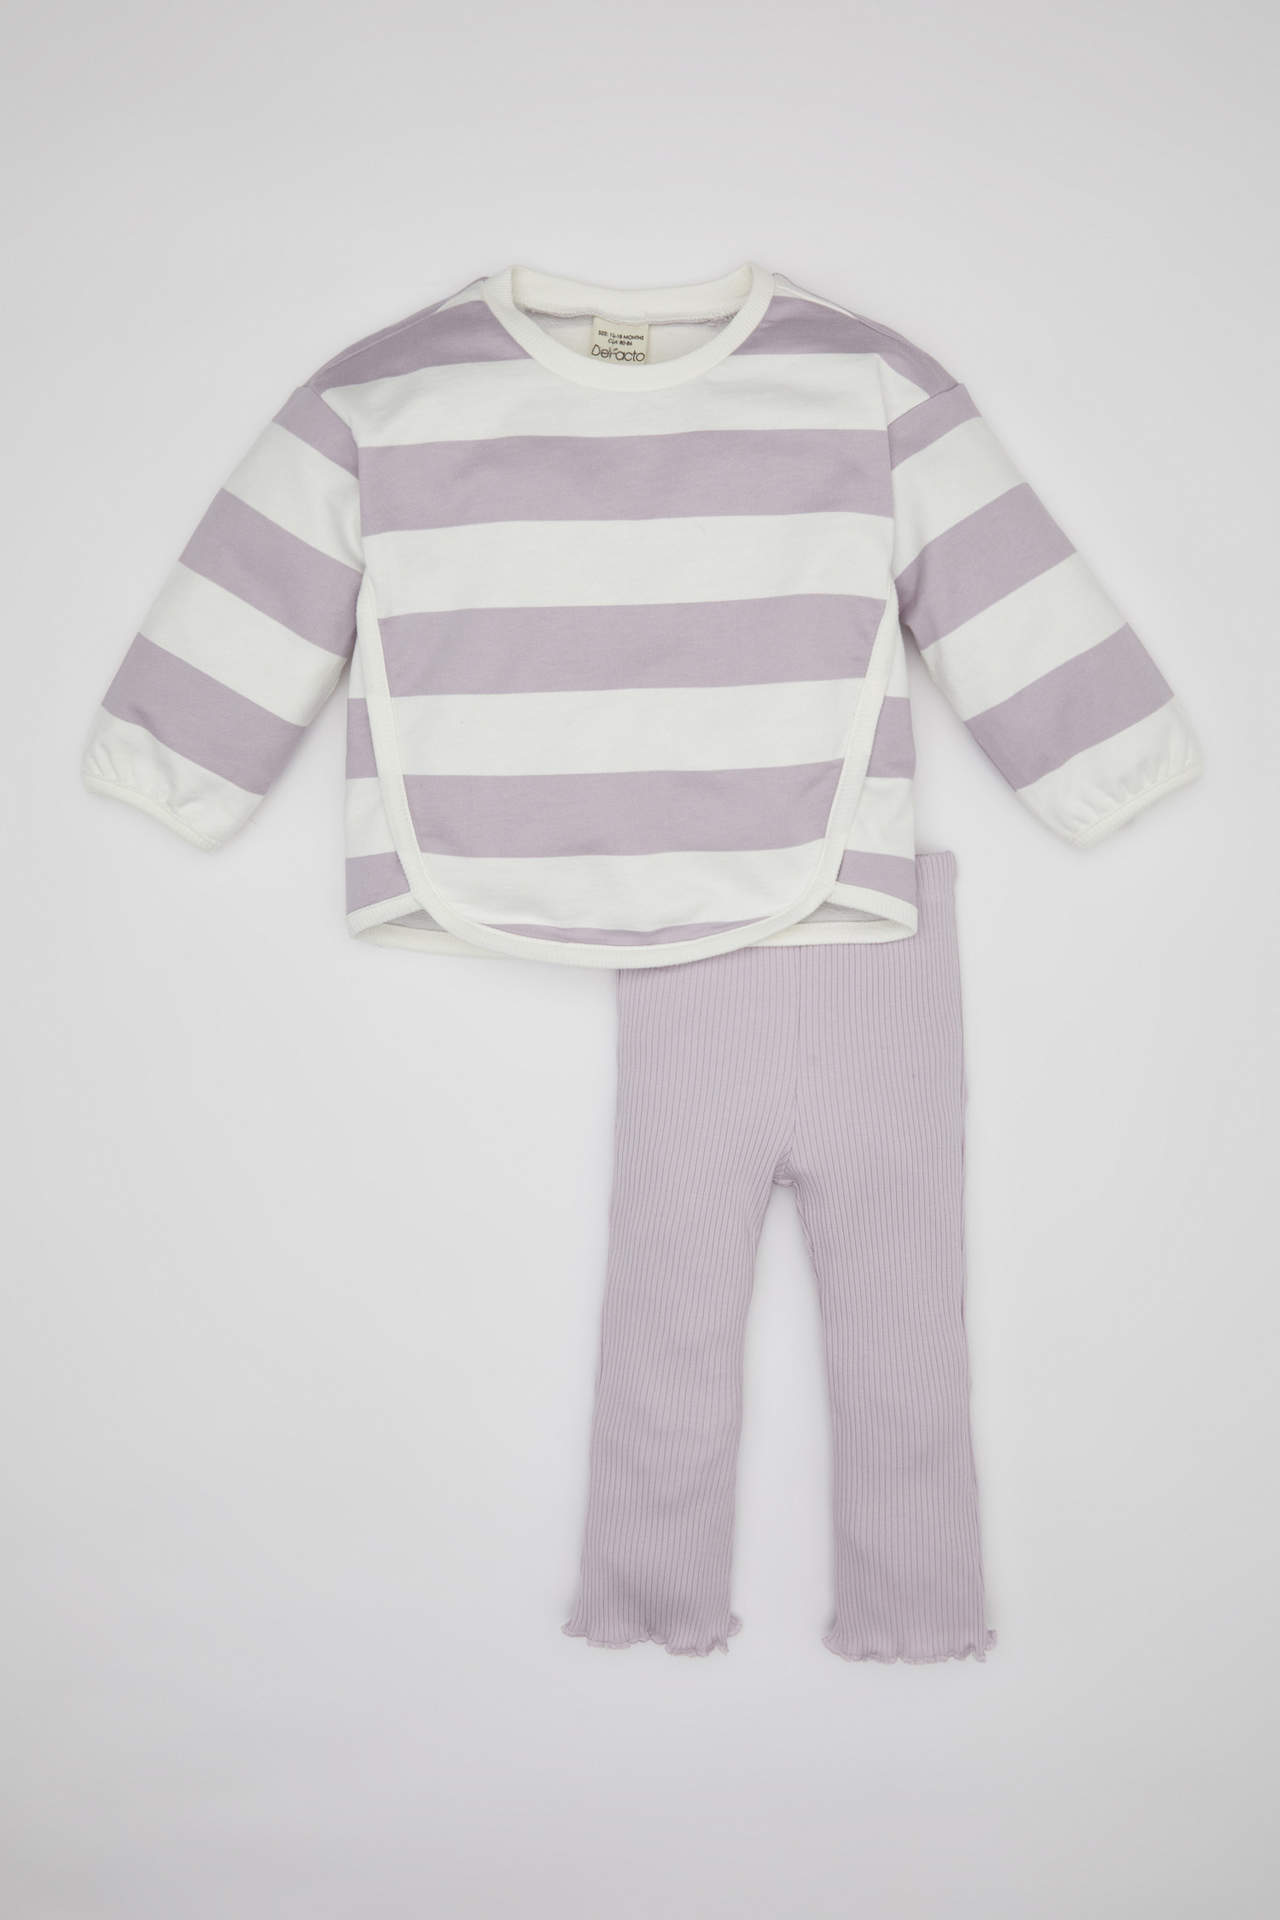 DEFACTO 2 piece Regular Fit Crew Neck Striped Knitted Set